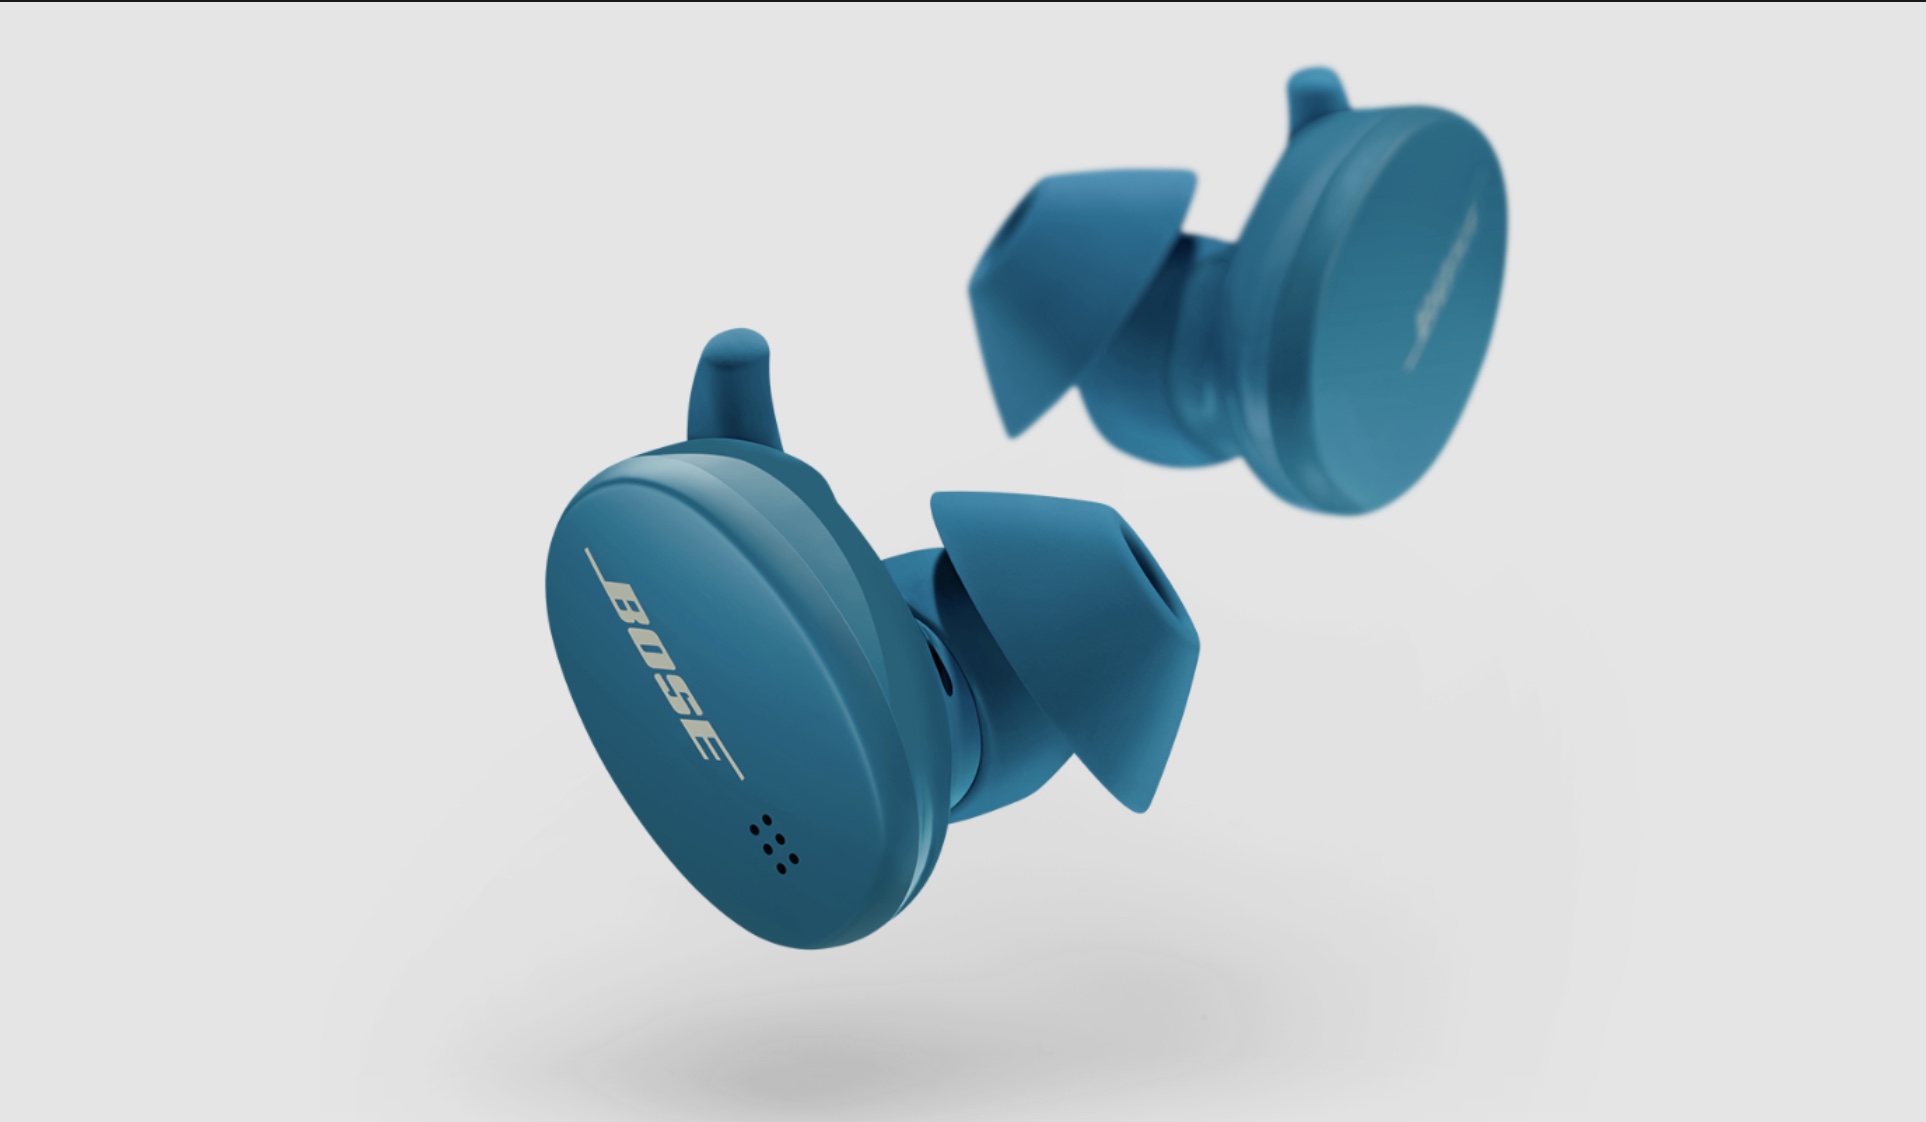 Best Wireless Earbuds to buy for your workout - 2022 Edition